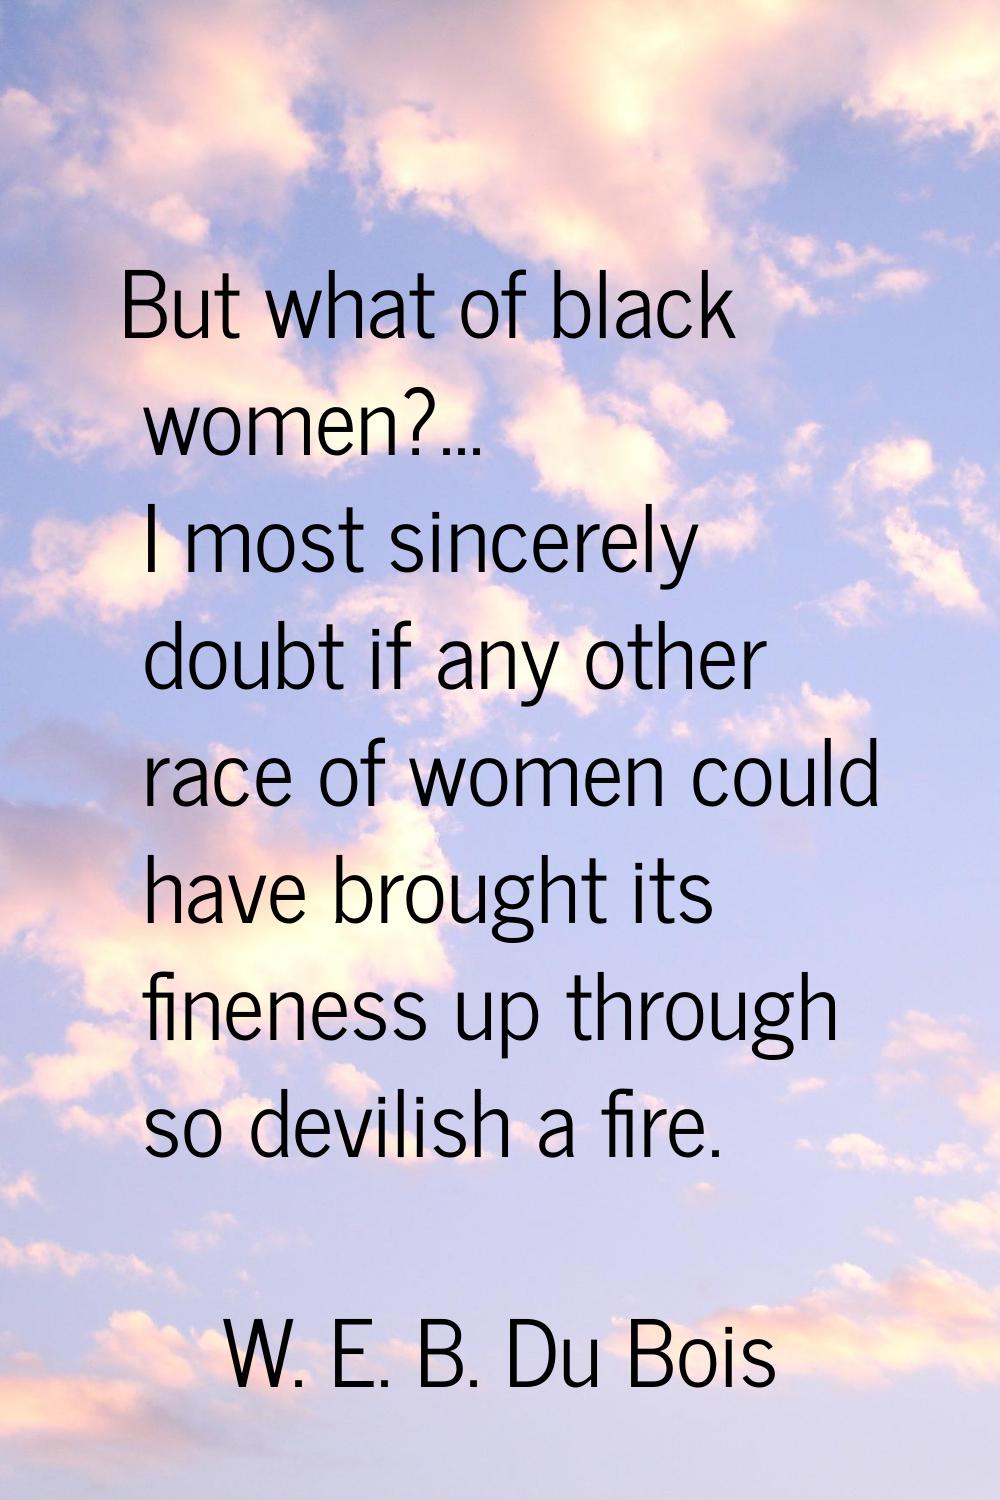 But what of black women?... I most sincerely doubt if any other race of women could have brought it